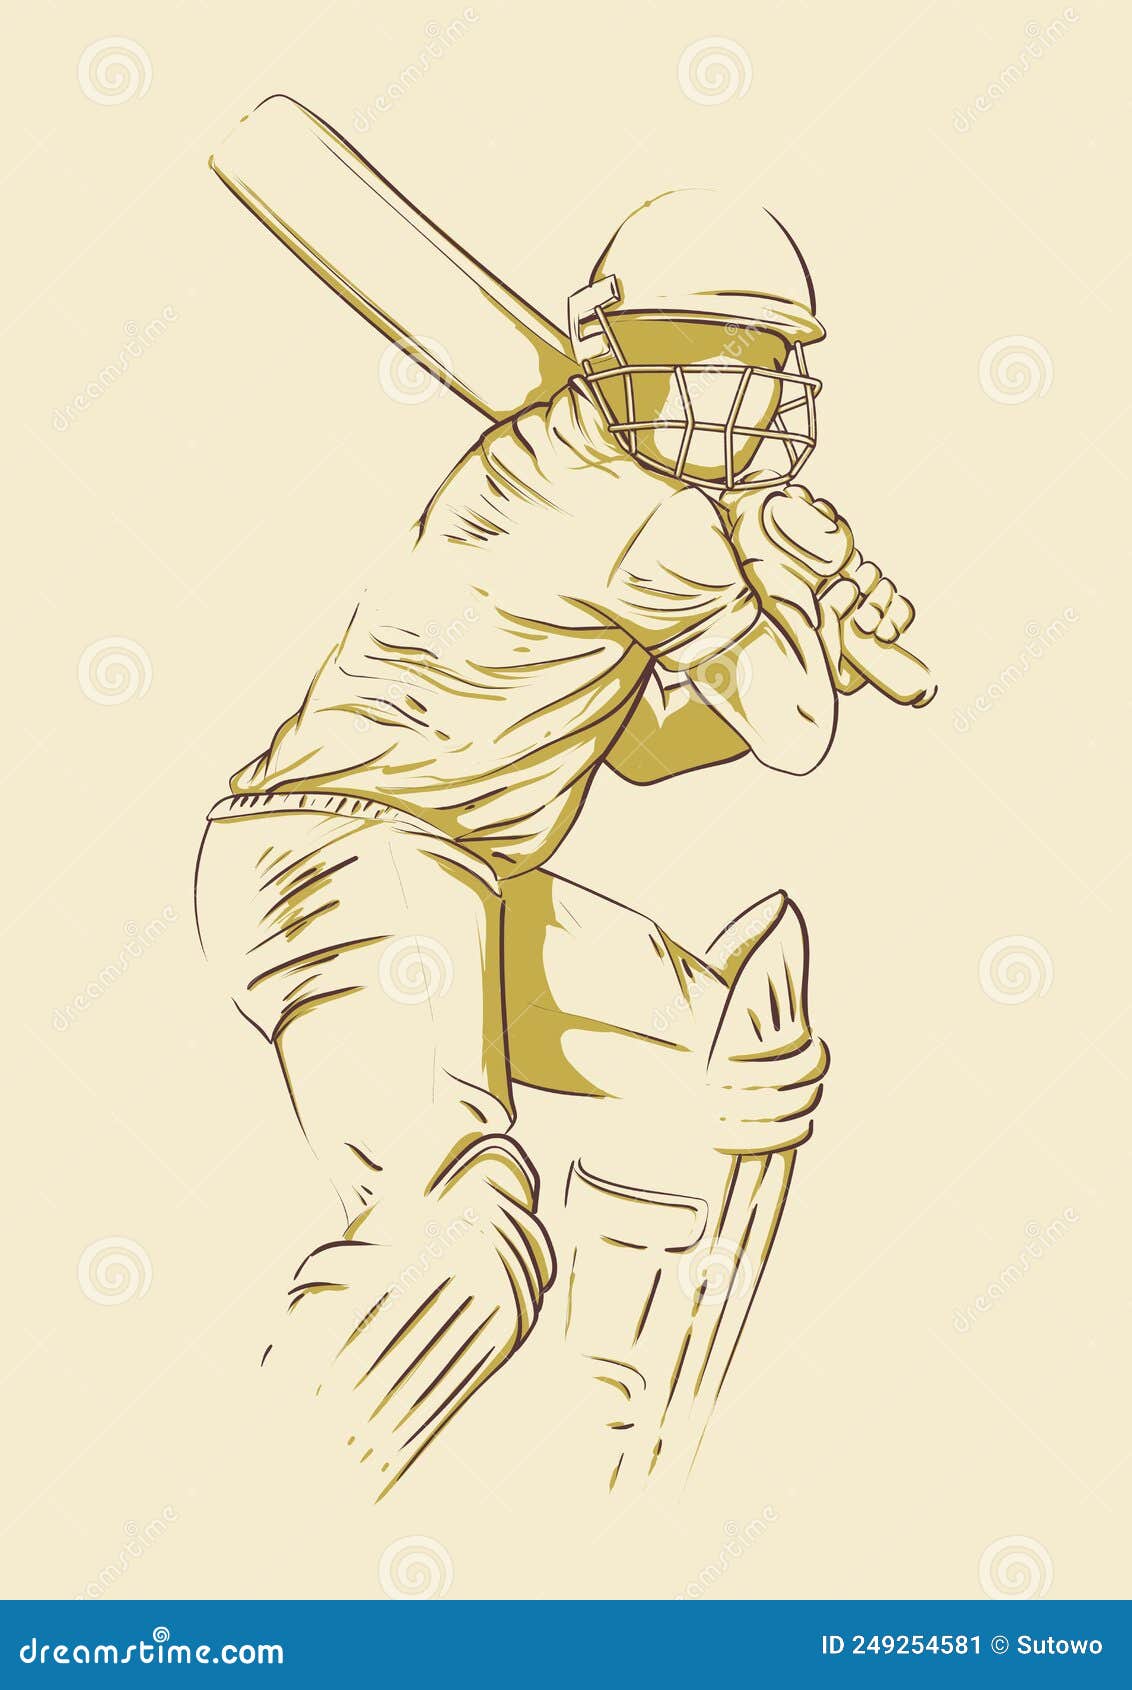 Amazon.com: Cricket Player Sport Abstract Wall Art, 11x14 Version 1 of 4  Ideal for Male Players, Coaches and Cricket Fans - Great Teen Boy Bedroom,  Cricket Club Locker Room or Dorm Room